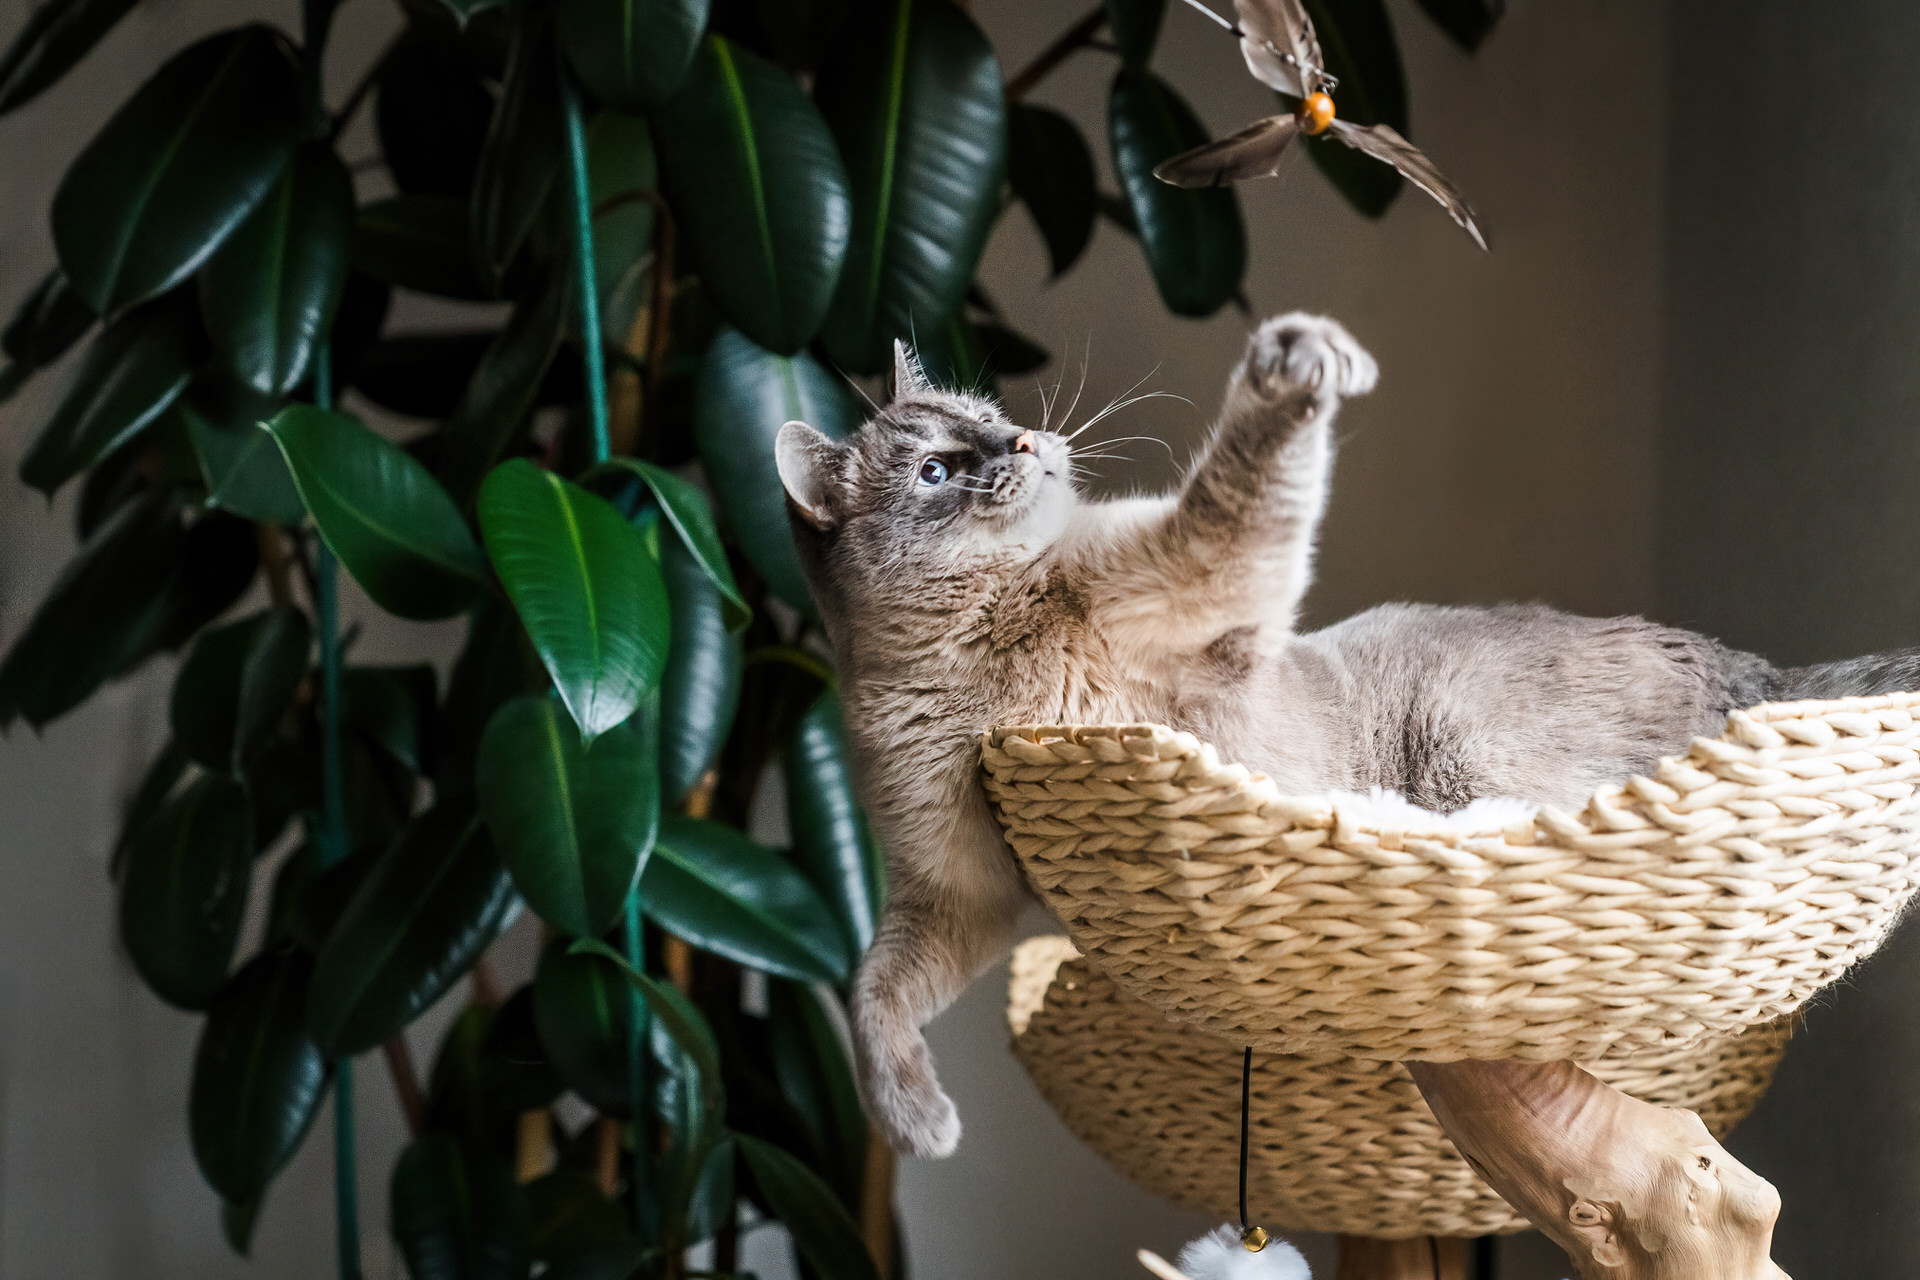 Cat playing in hanging basket with plant.